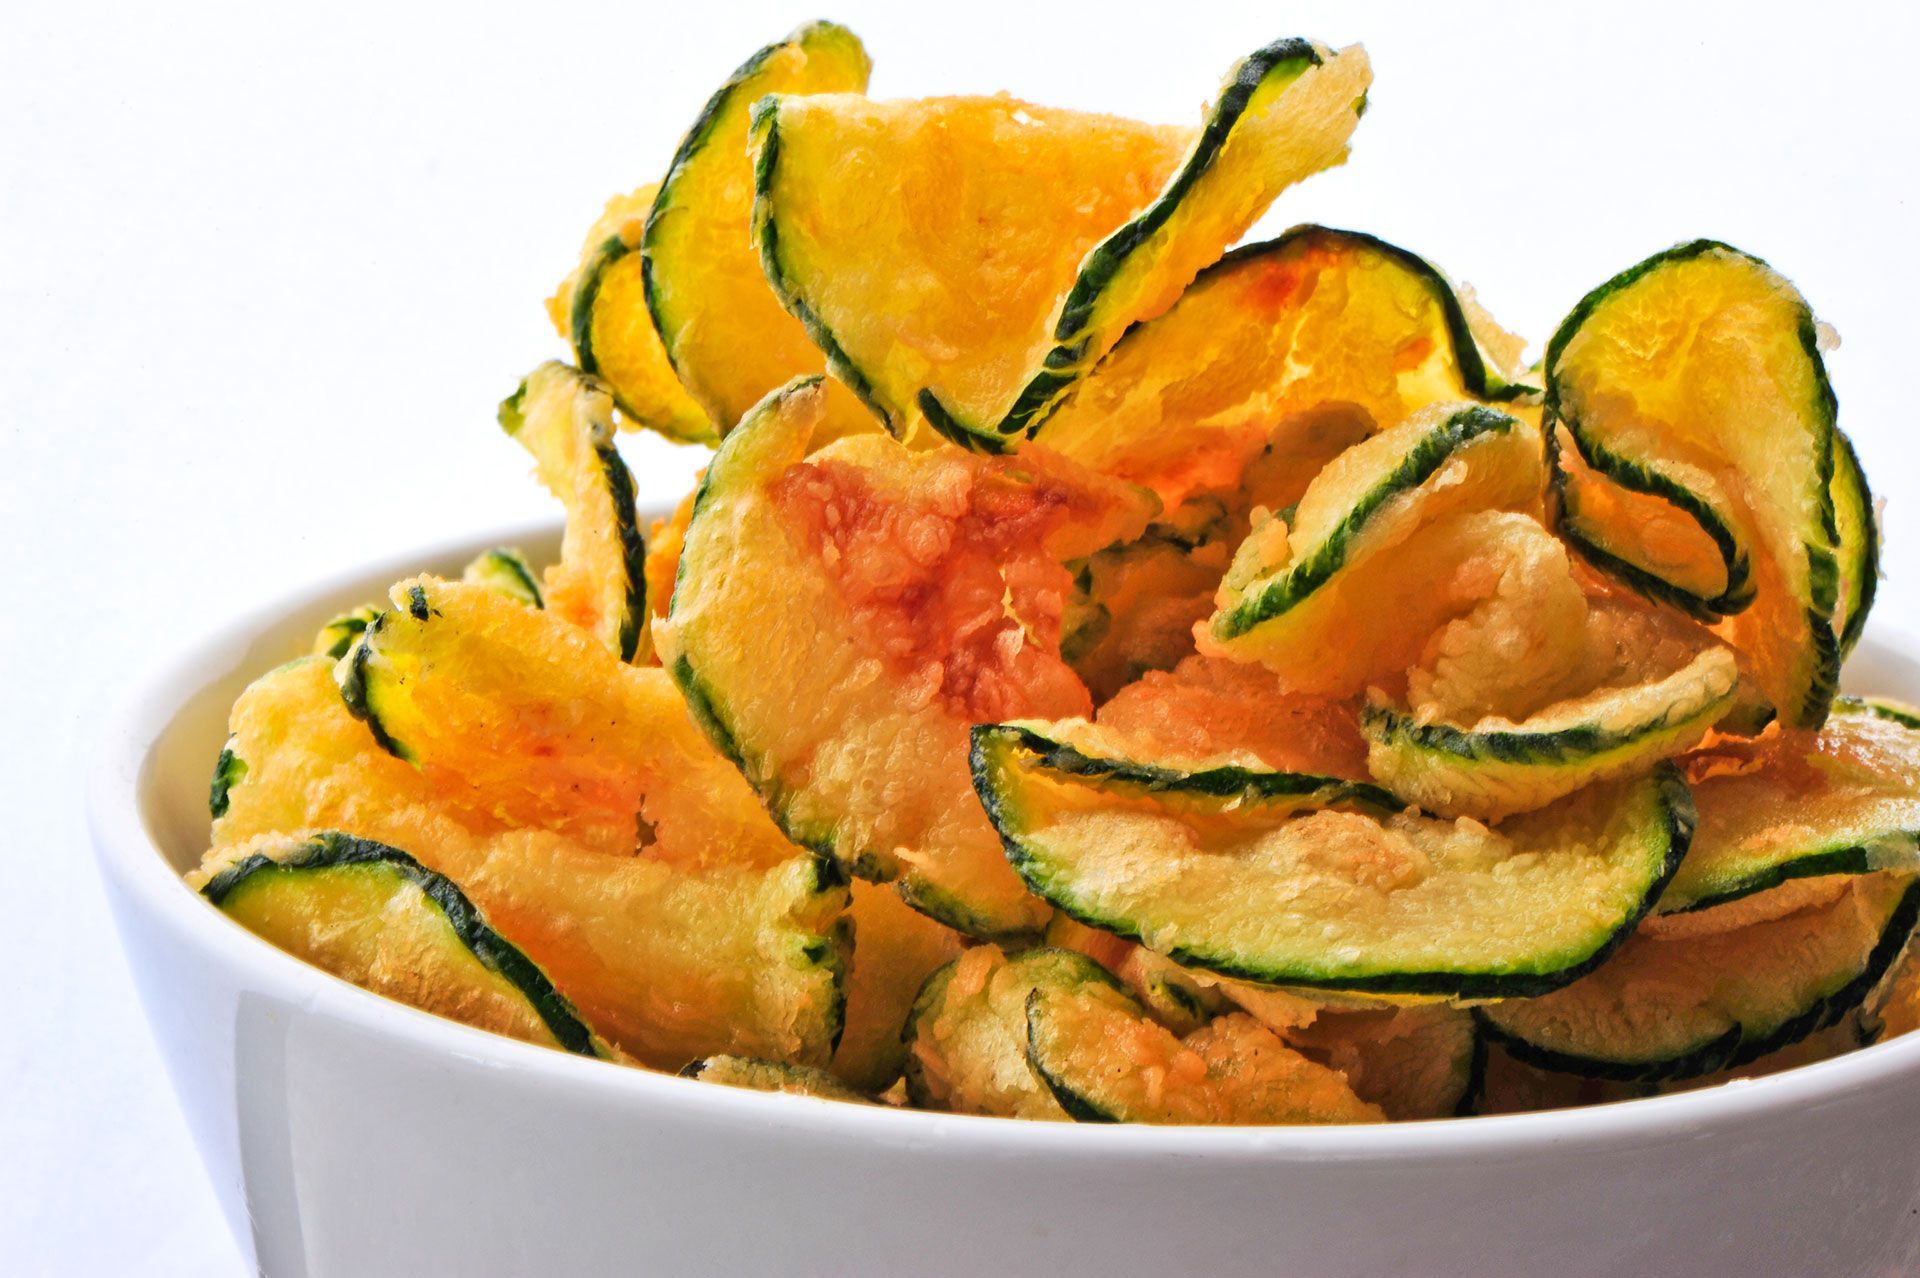 Cut a zucchini into thin slices and toss in 1 Tbsp olive oil, sea salt, and pepper. Sprinkle with paprika and bake at 450 degrees